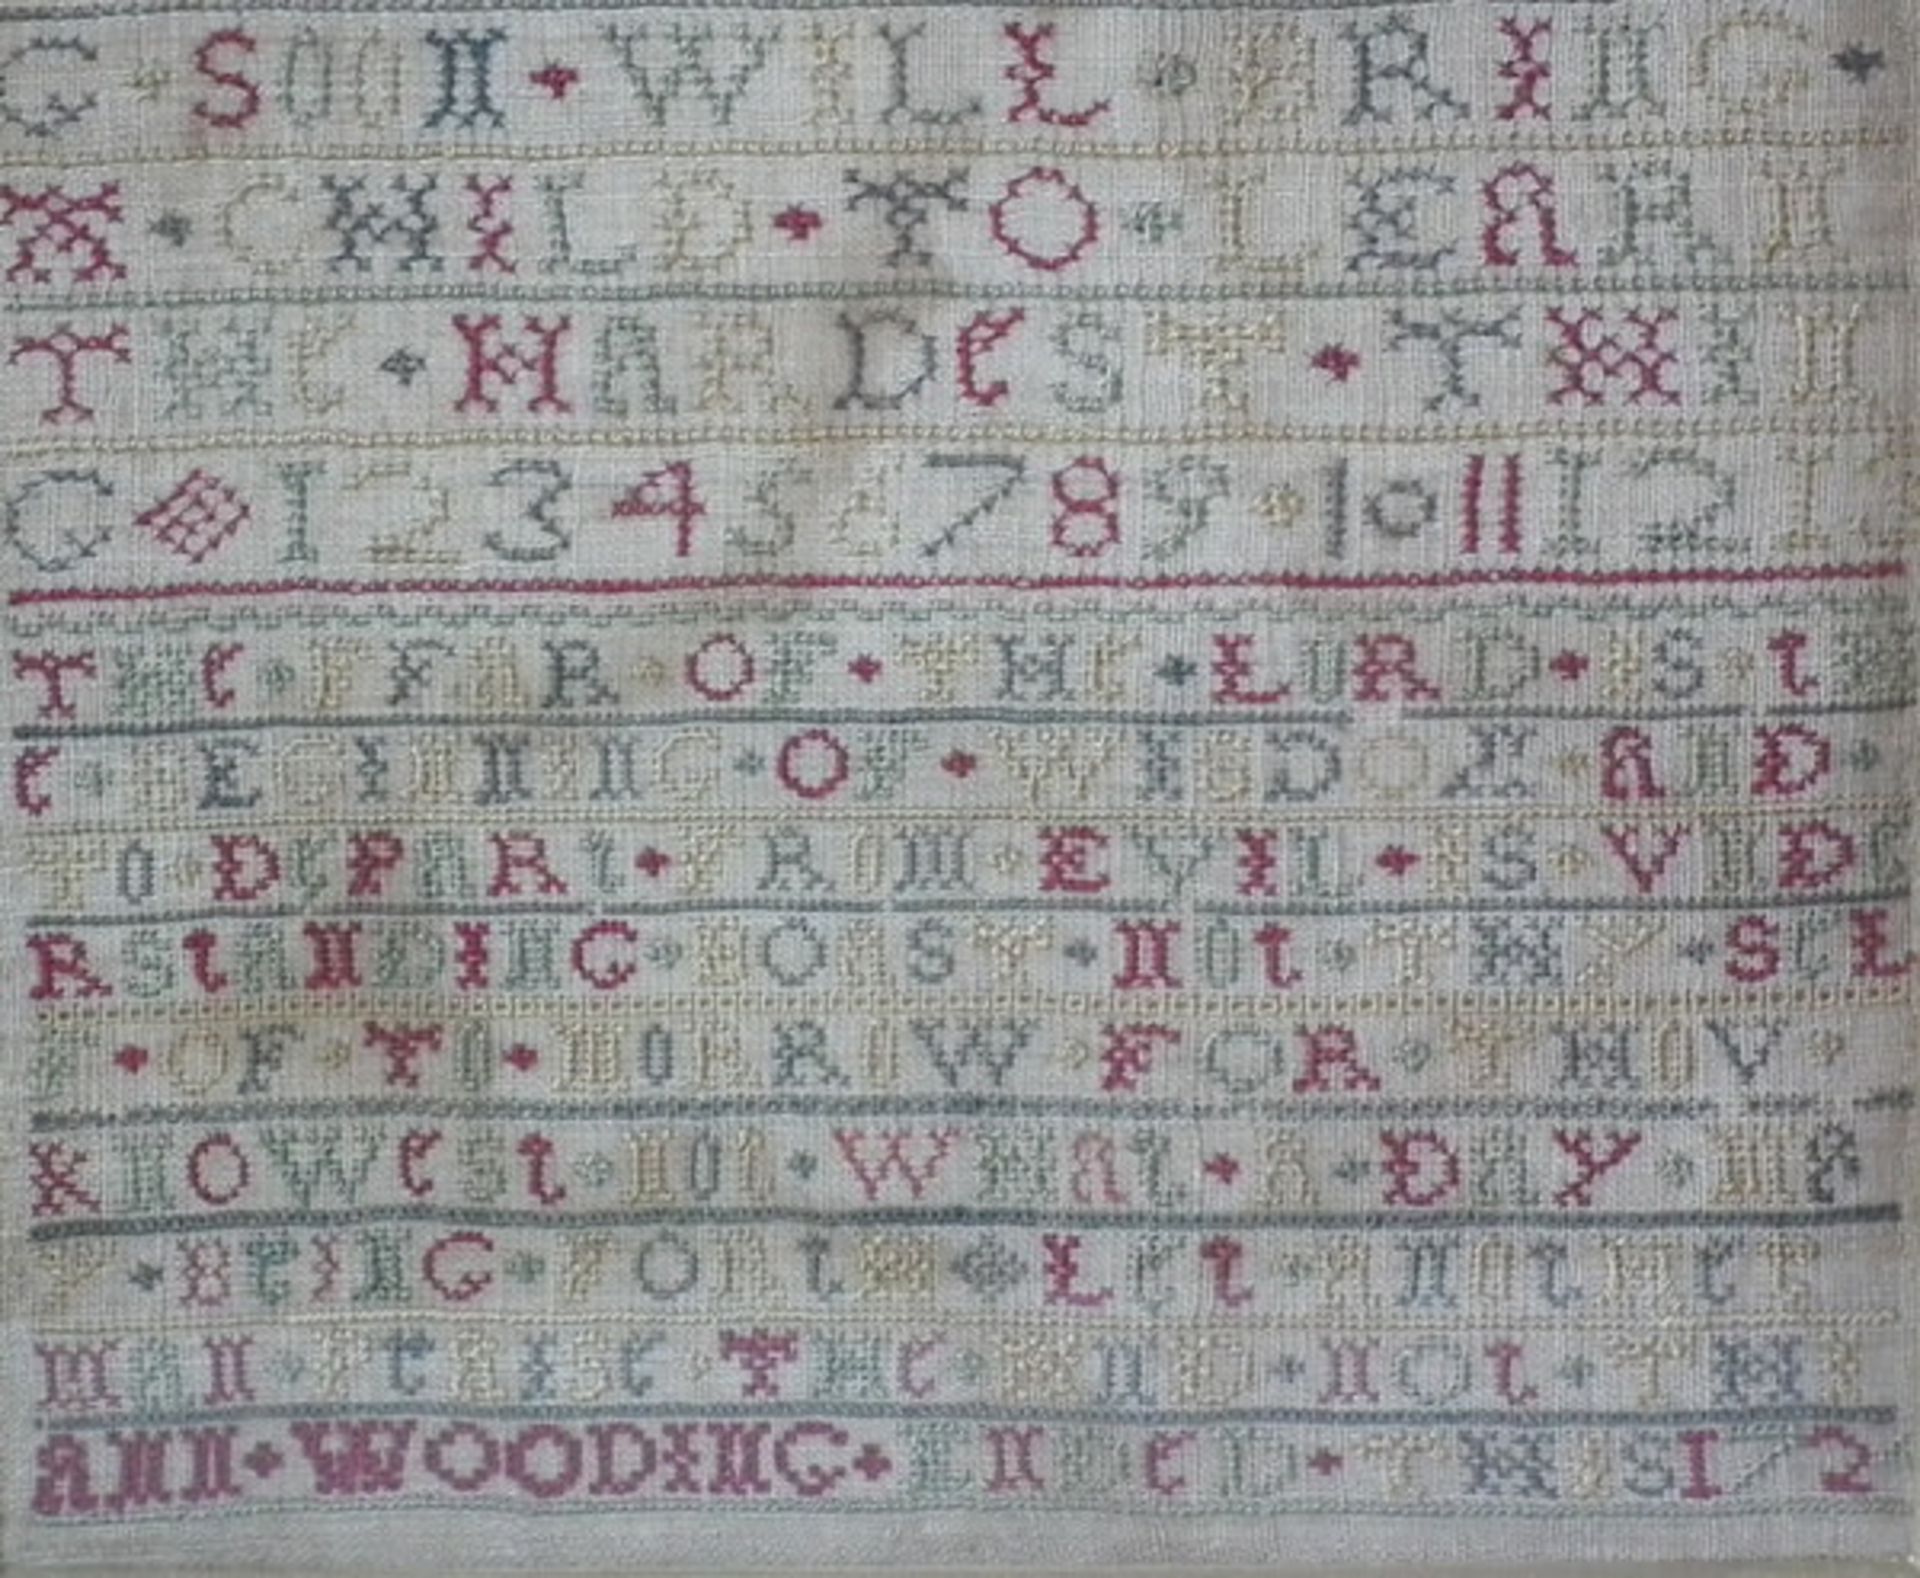 Needlework Band Sampler dated 1724 by Ann Wooding - FREE UK DELIVERY - Image 3 of 20